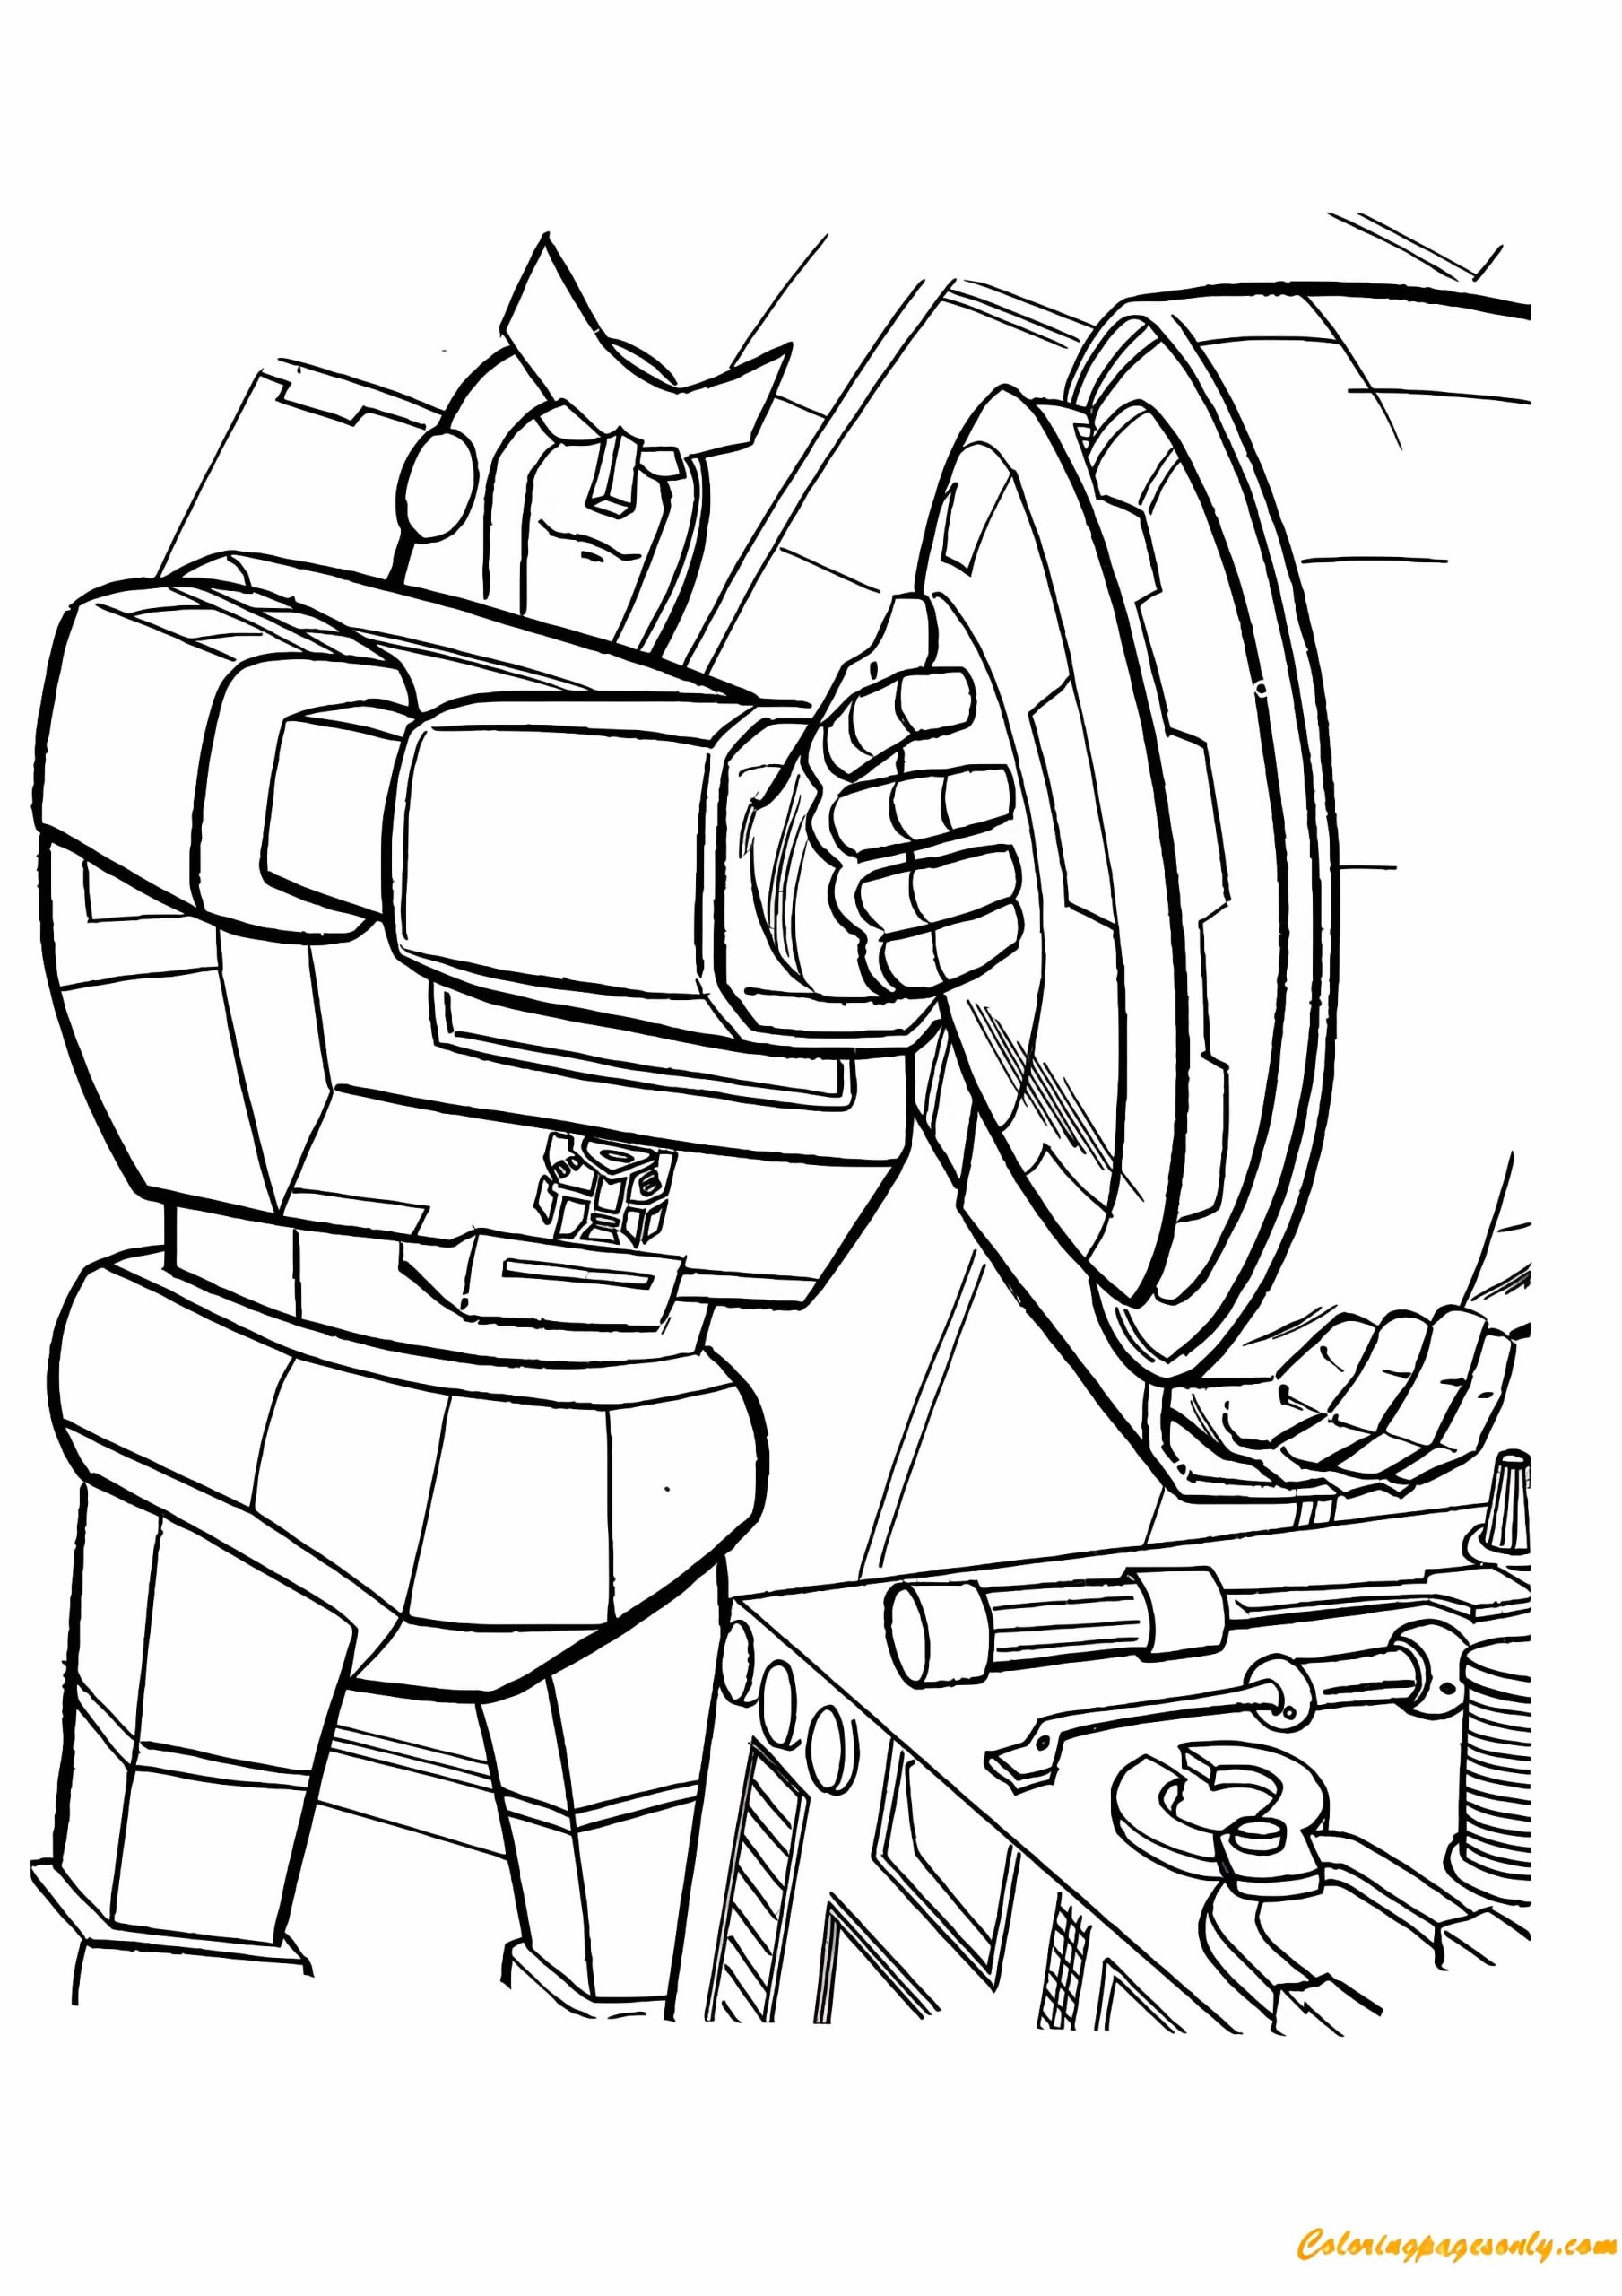 Transformers Repairing Coloring Pages